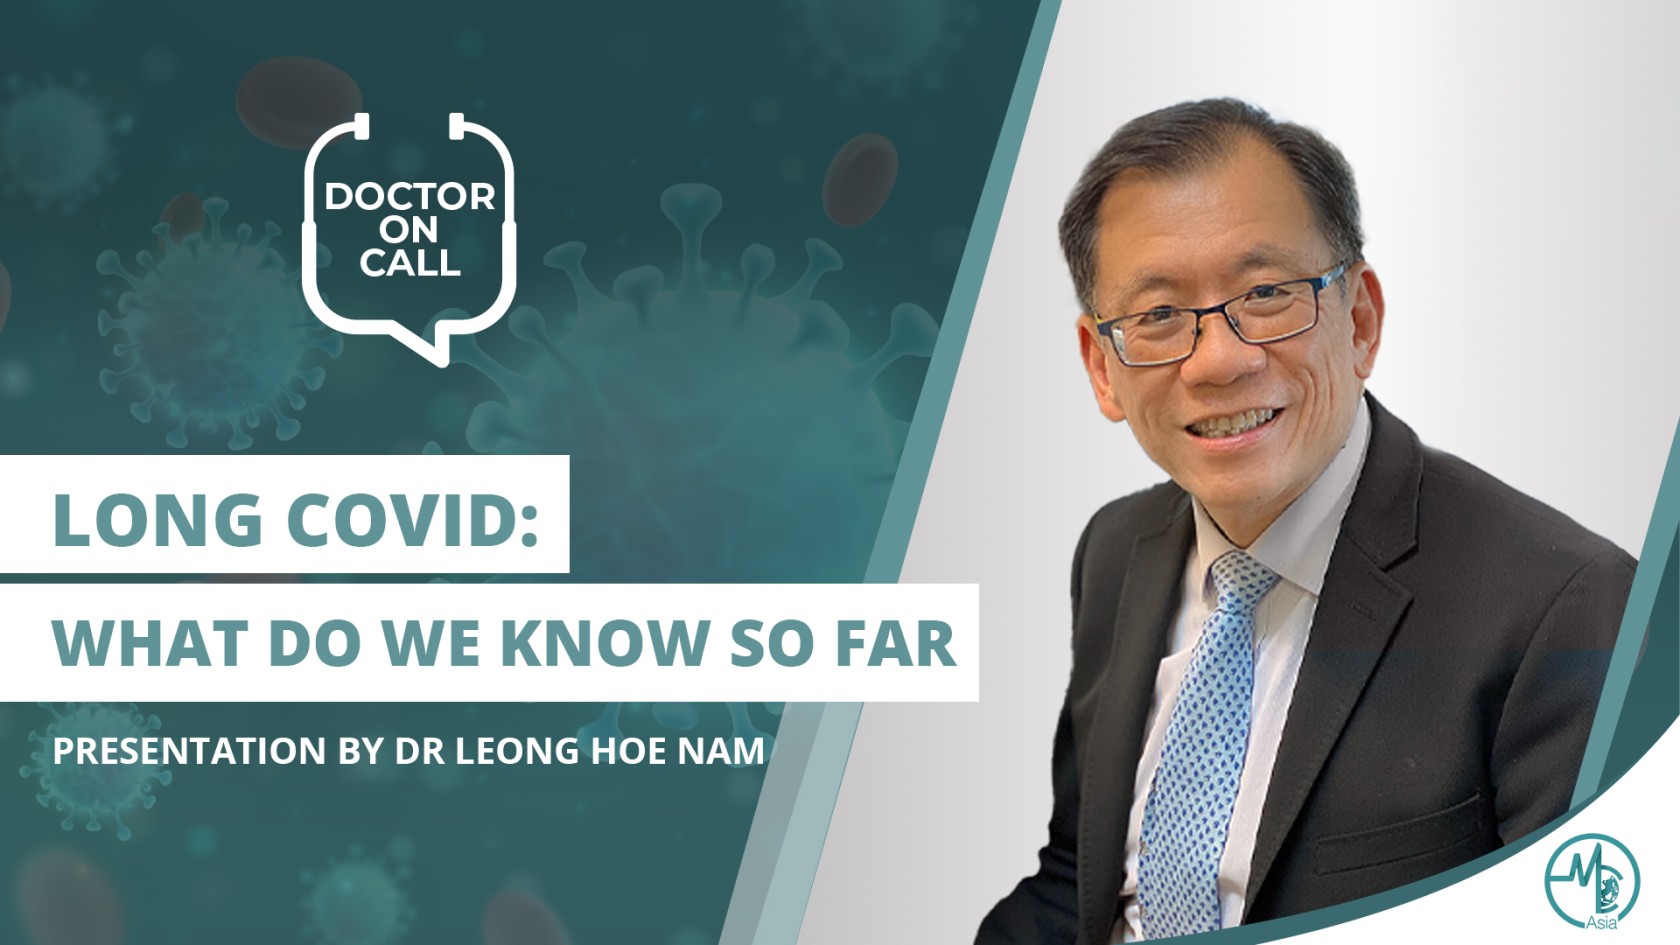 Doctor On Call (DOC): Dr Leong Hoe Nam on Long COVID – What Do We Know So Far? (Part 1)